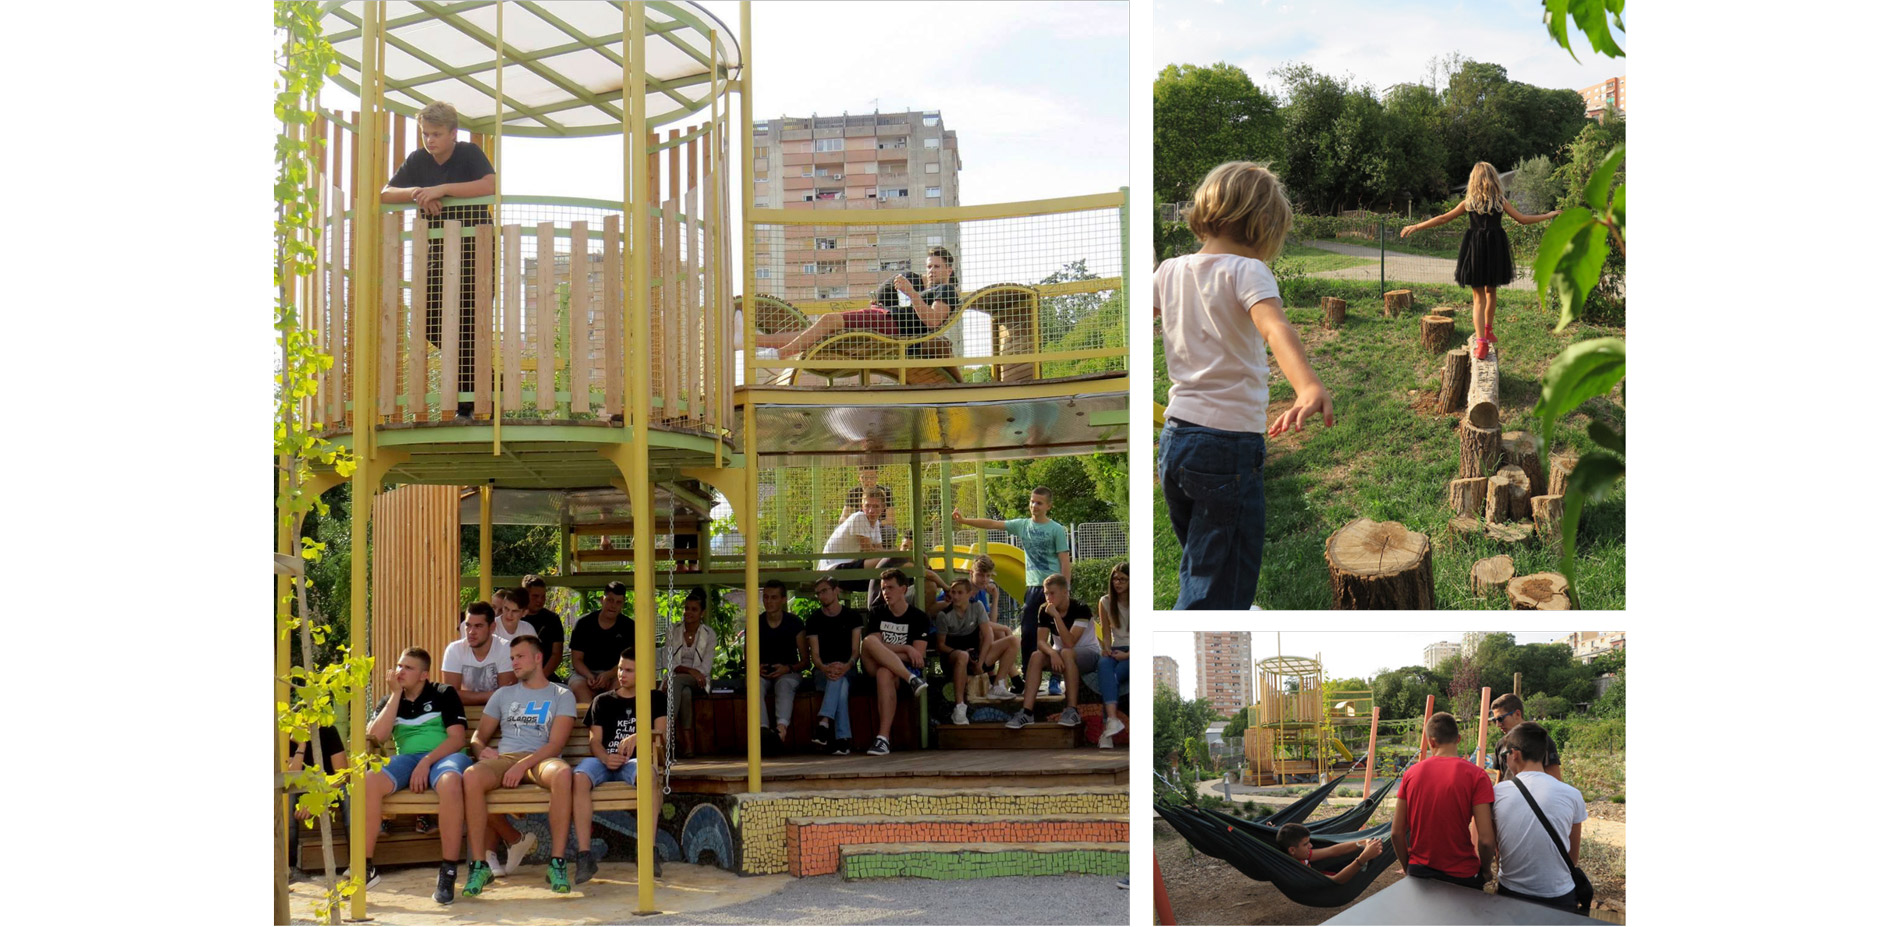 As intended, the garden caters to various scales of social interactions for varying age groups. The central large gathering space is frequently used f…